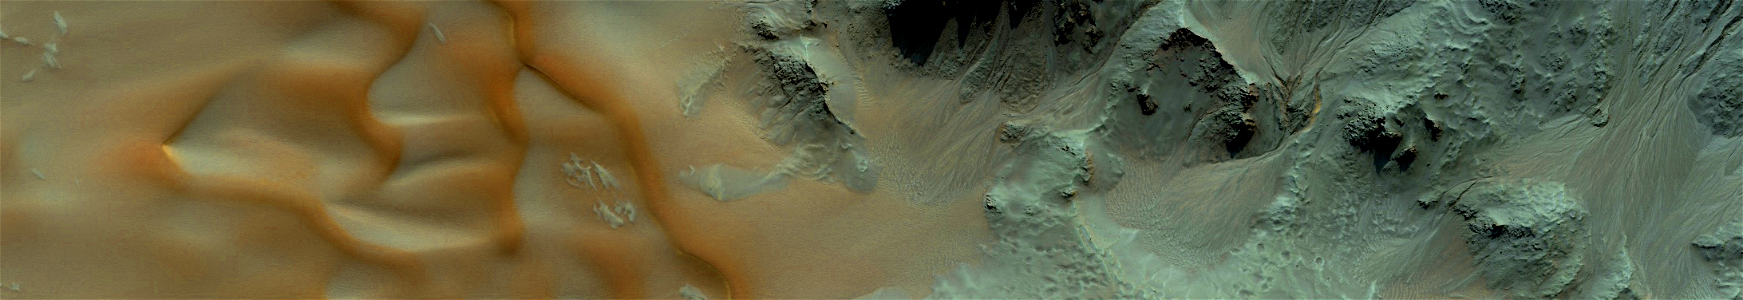 Mars - Gullies and Dunes in Hale Crater photo